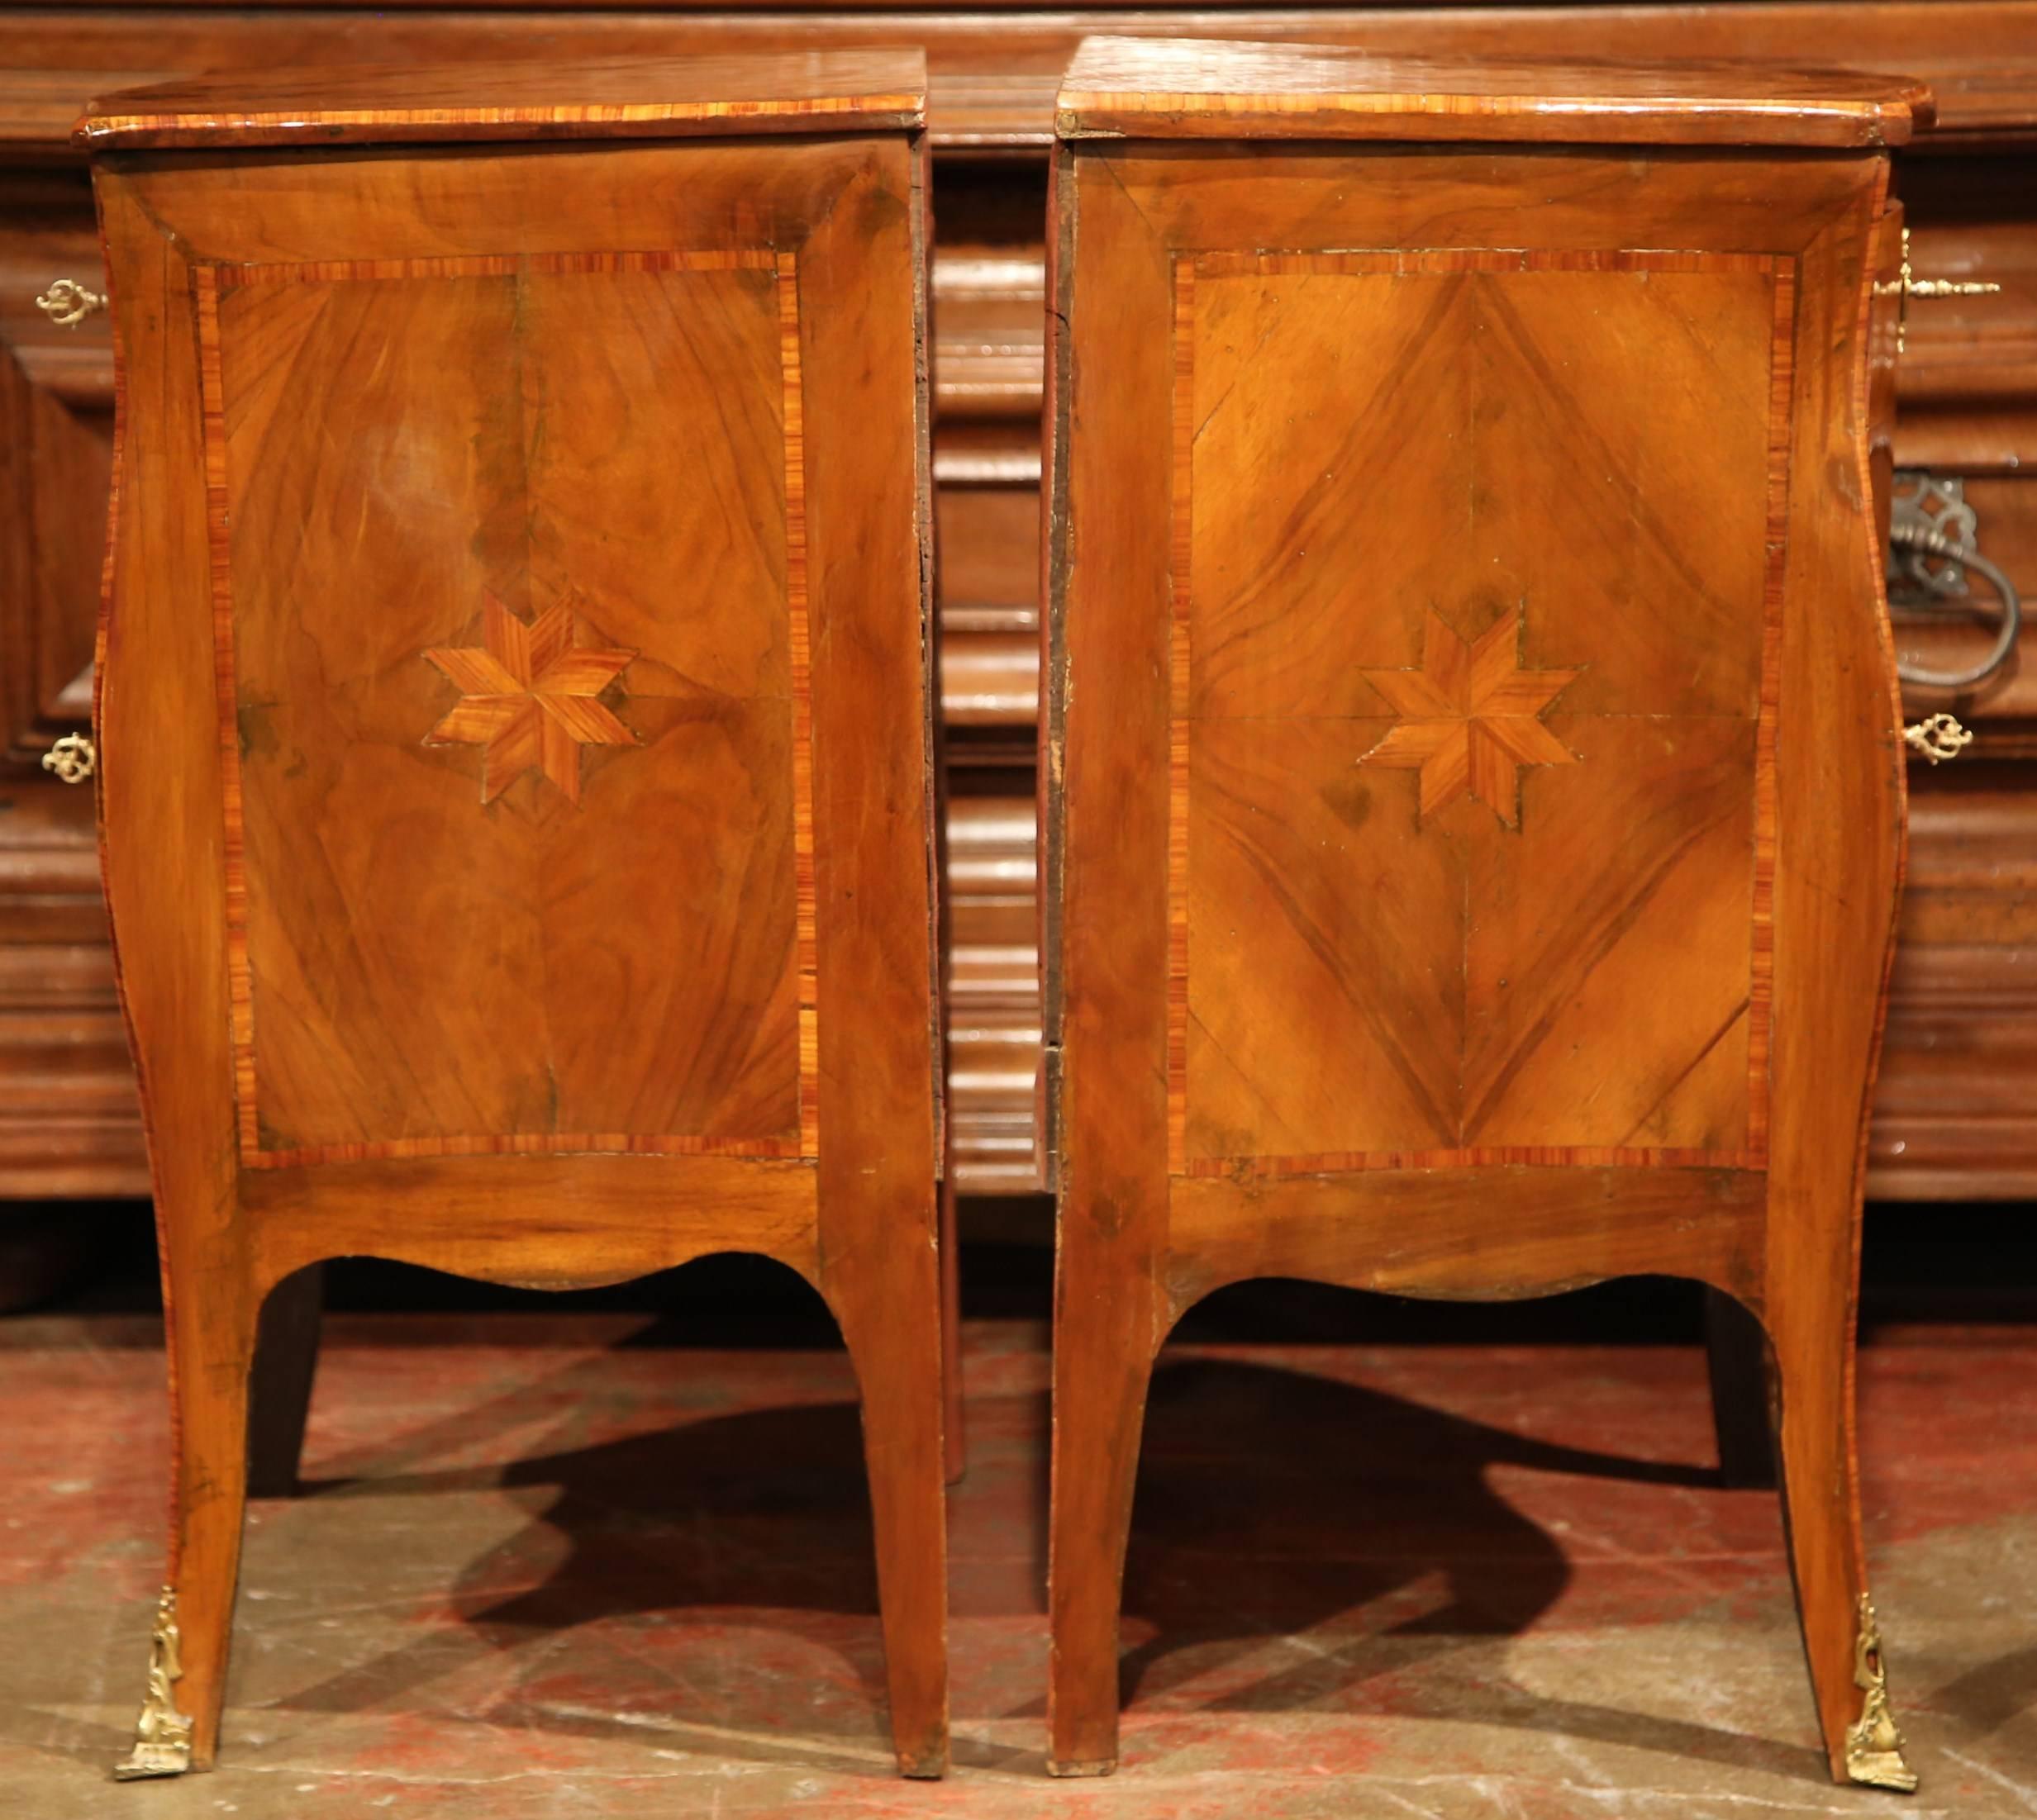 Pair of 19th Century French Louis XV Carved Walnut Bedside Tables with Marquetry 2